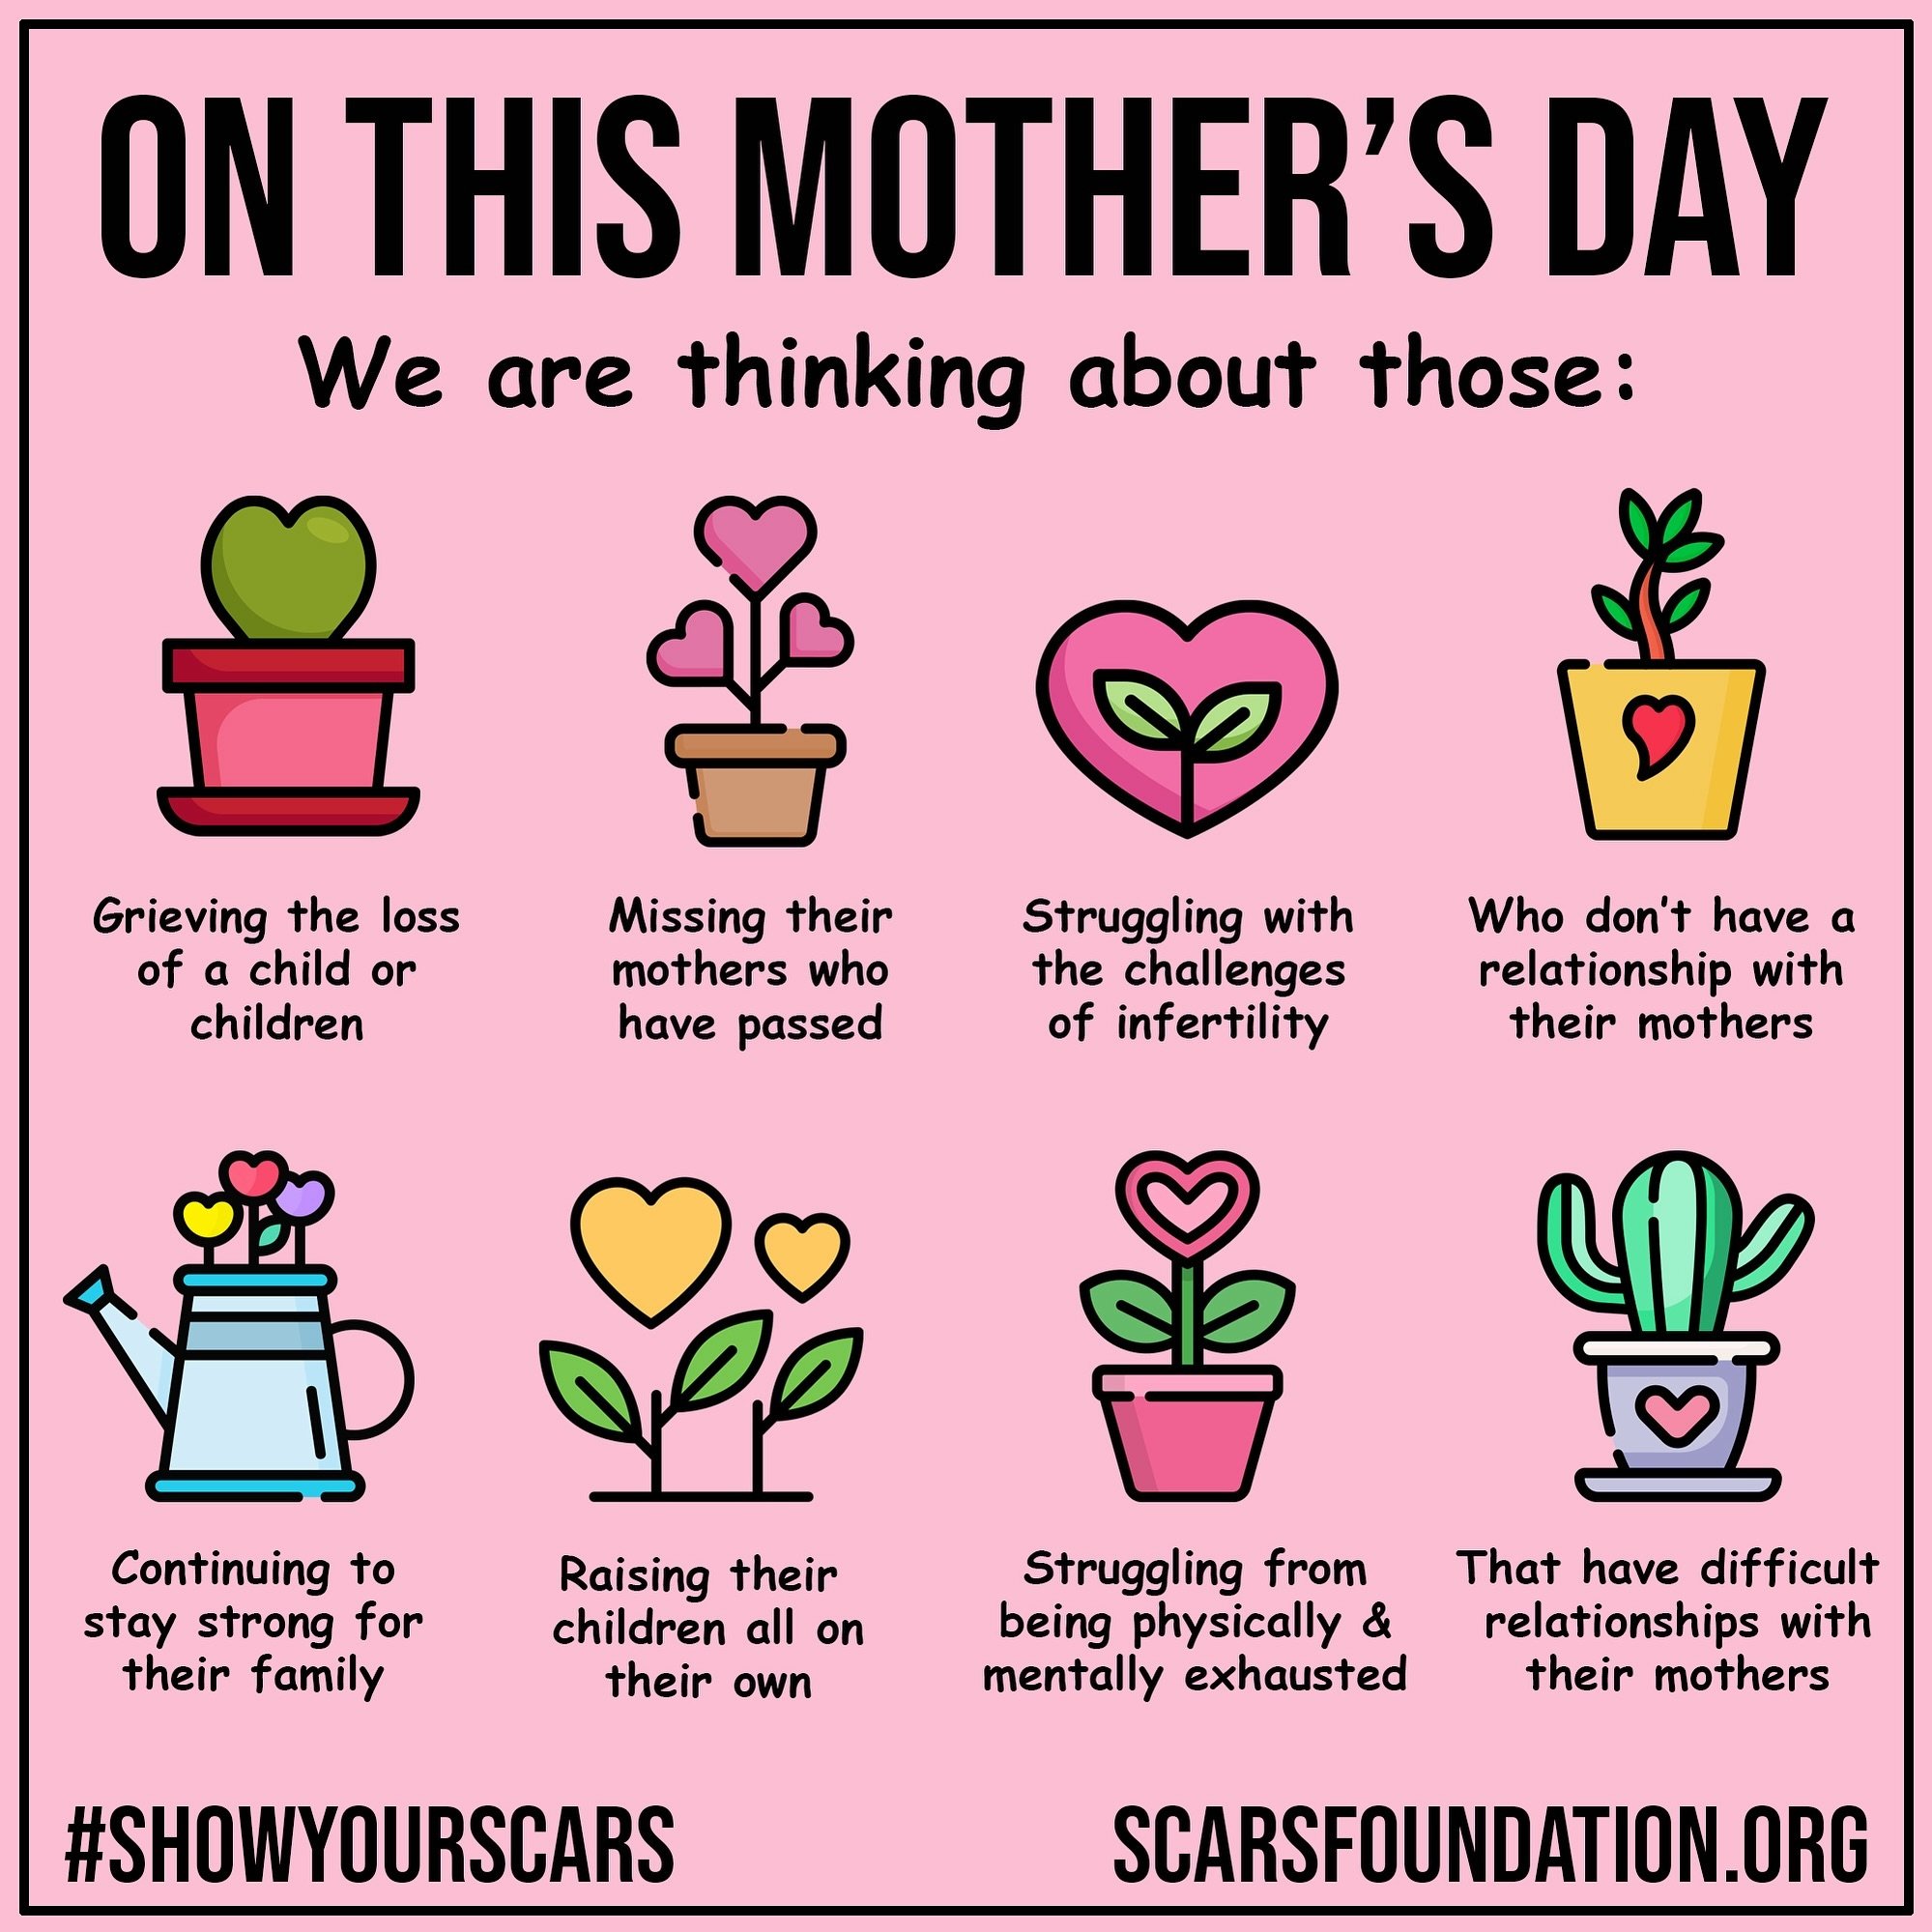 To our Scars Family on this Mother&rsquo;s Day 💗 The Scars Foundation

#mothersday #mentalhealth #mentalhealthawareness #ptsd #scarsstrong #showyourscars  #staystrong #strongmom  #mentalwellness #depression #suicideprevention #suicideawareness #make